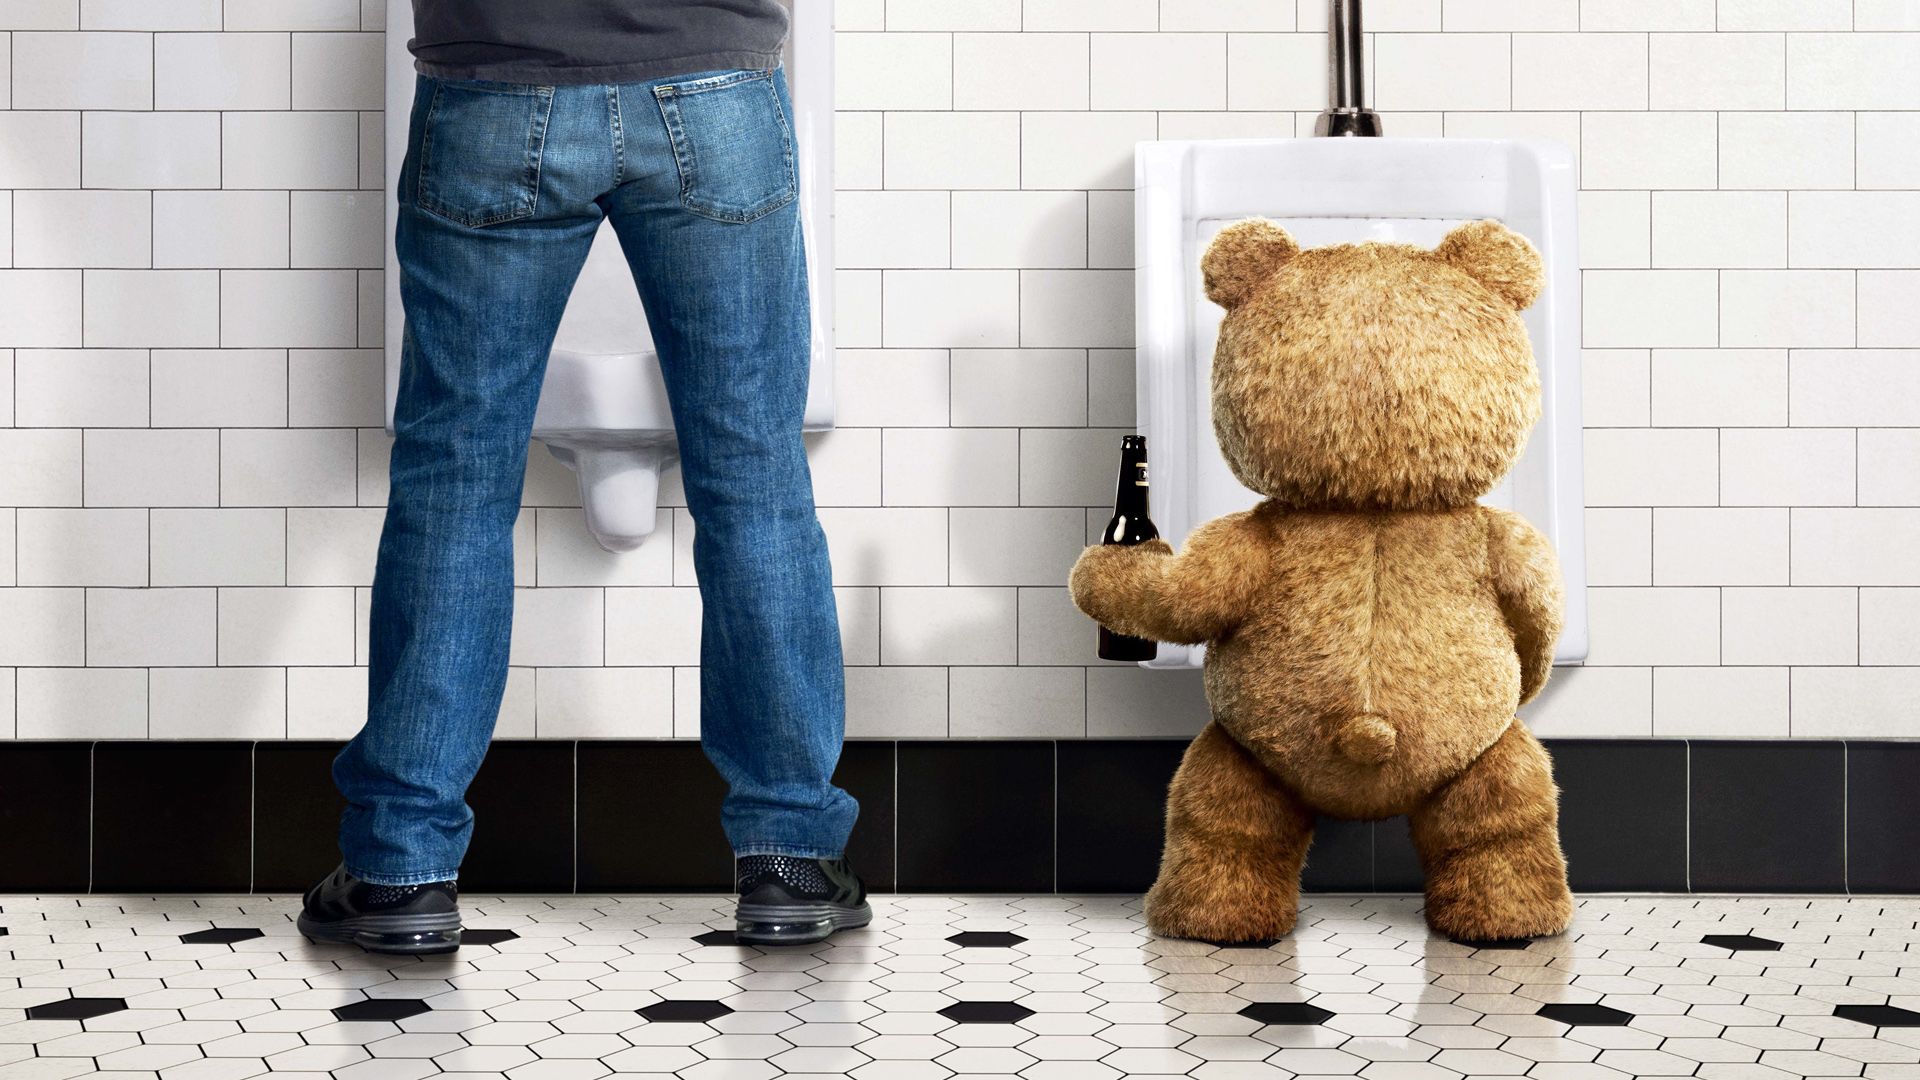 Ted 2 wallpaper 4